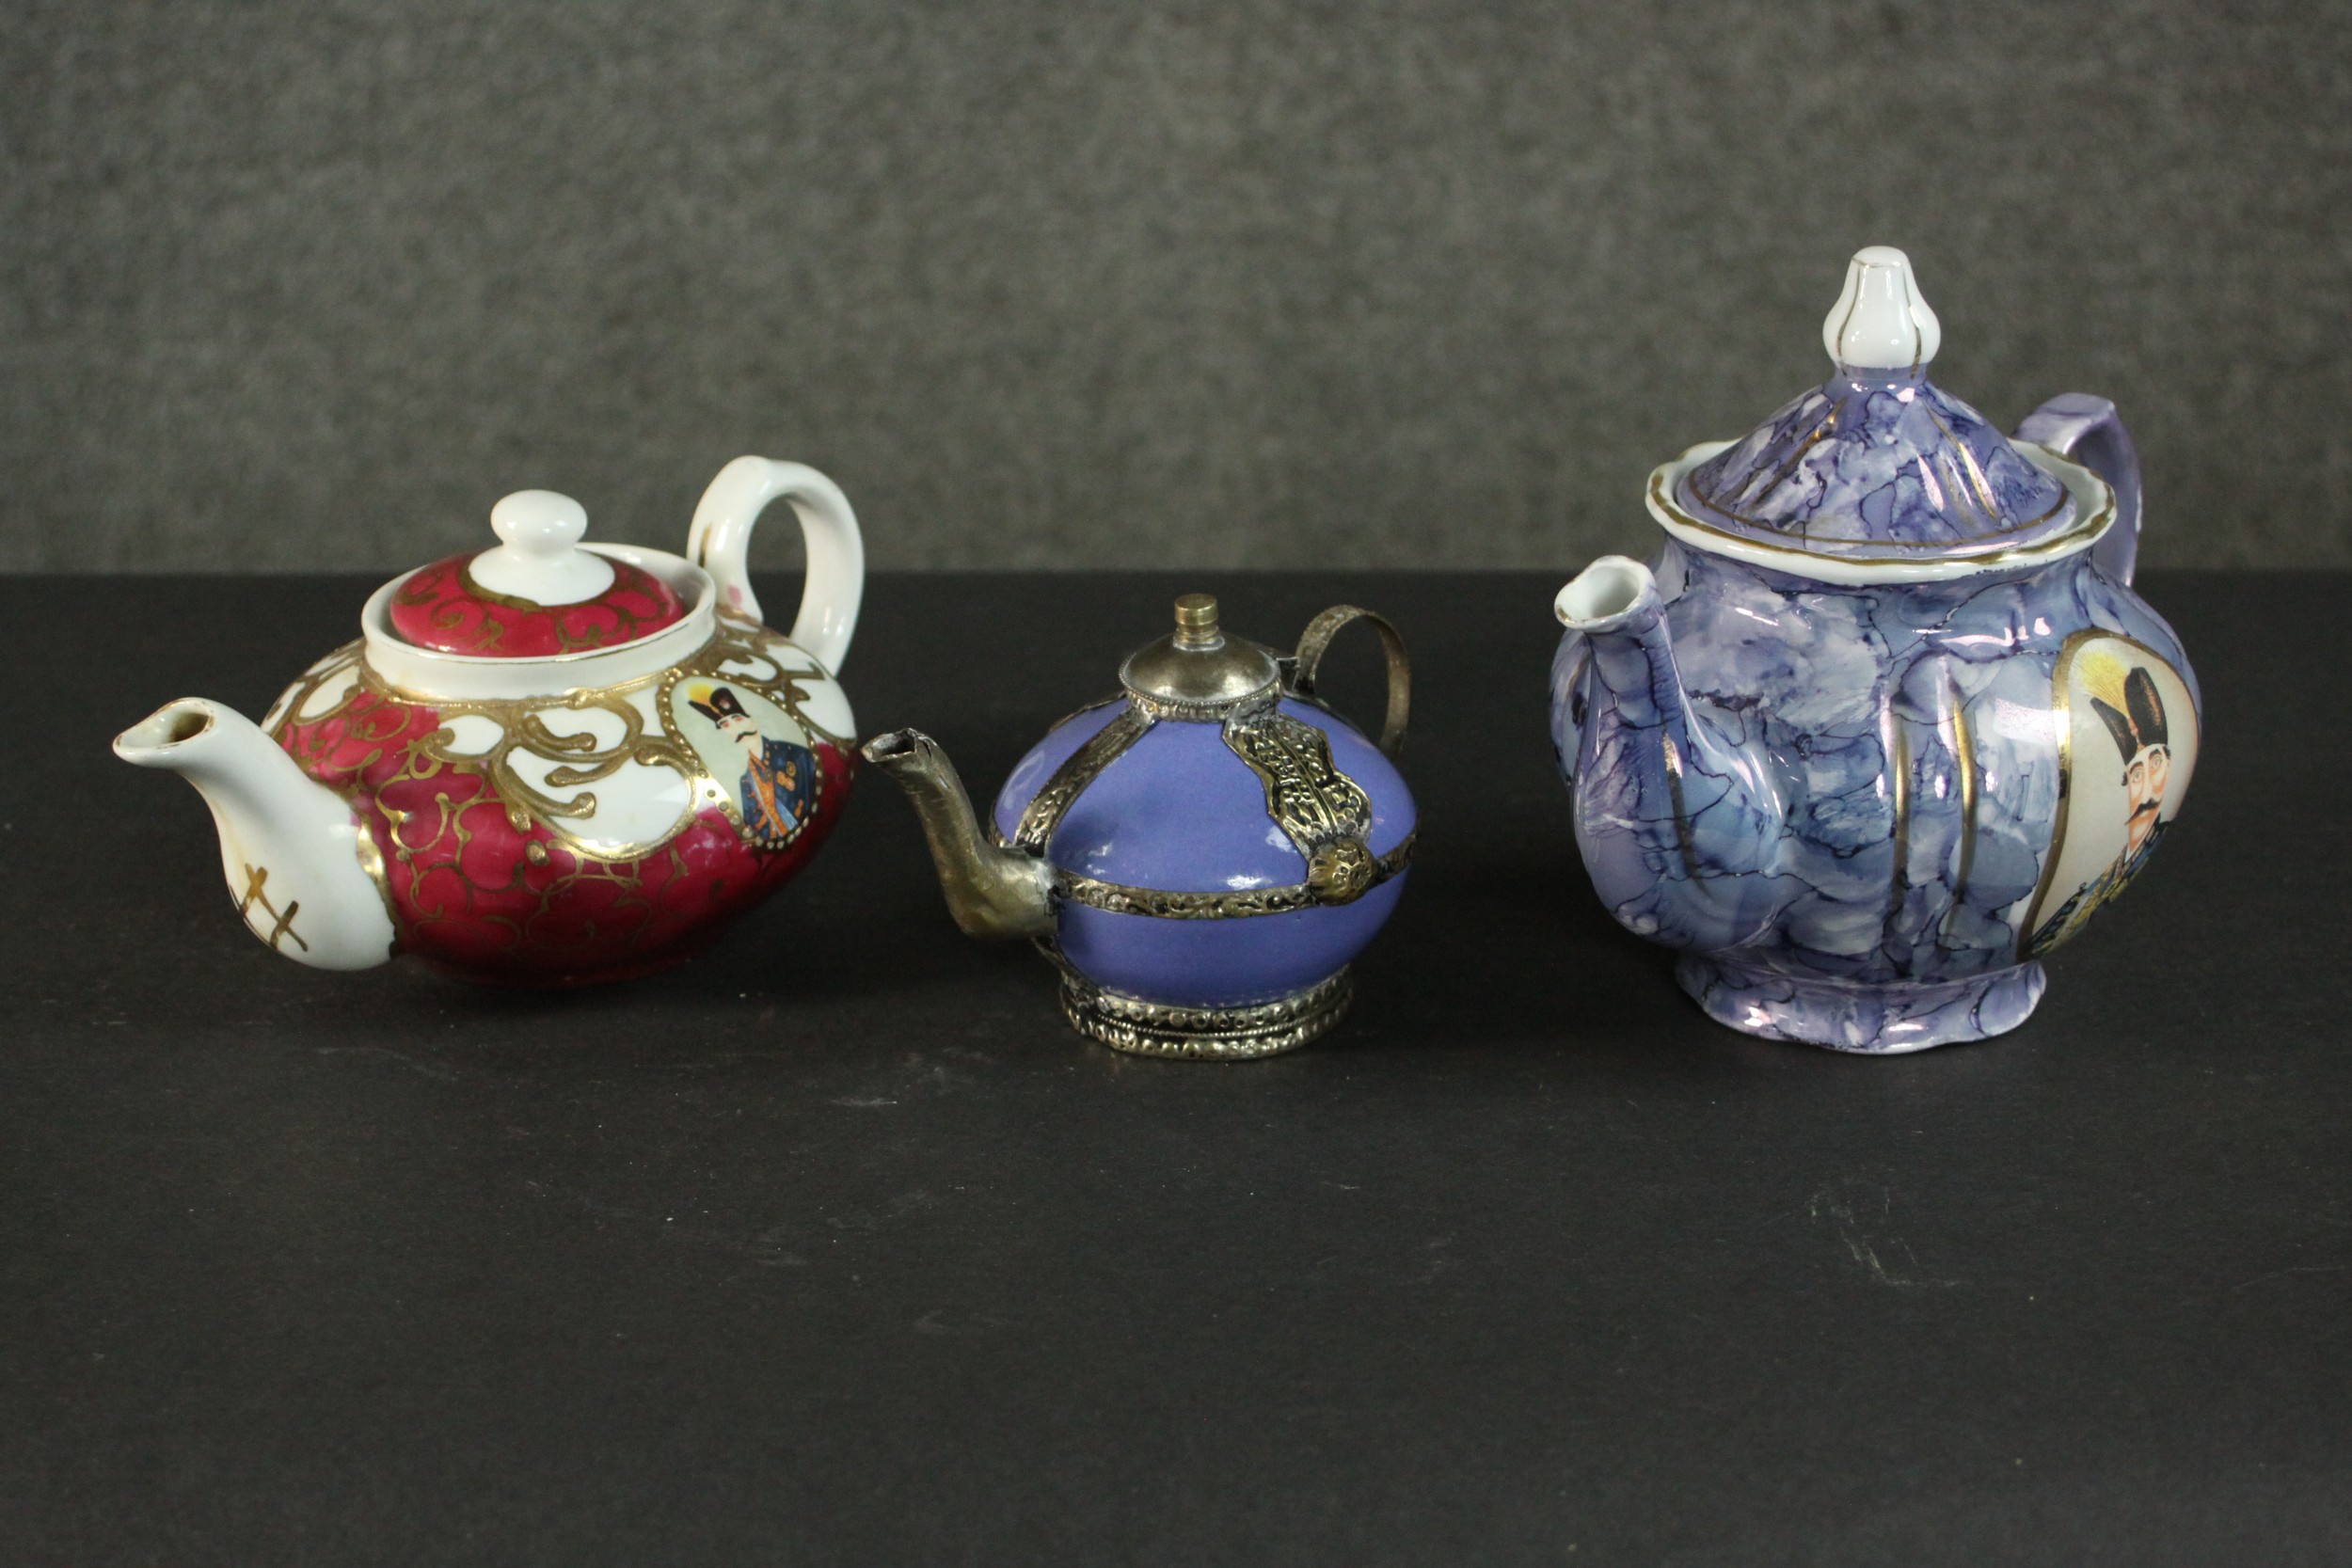 Three porcelain and pottery teapots, two made for the Persian market with portraits of Naser al-